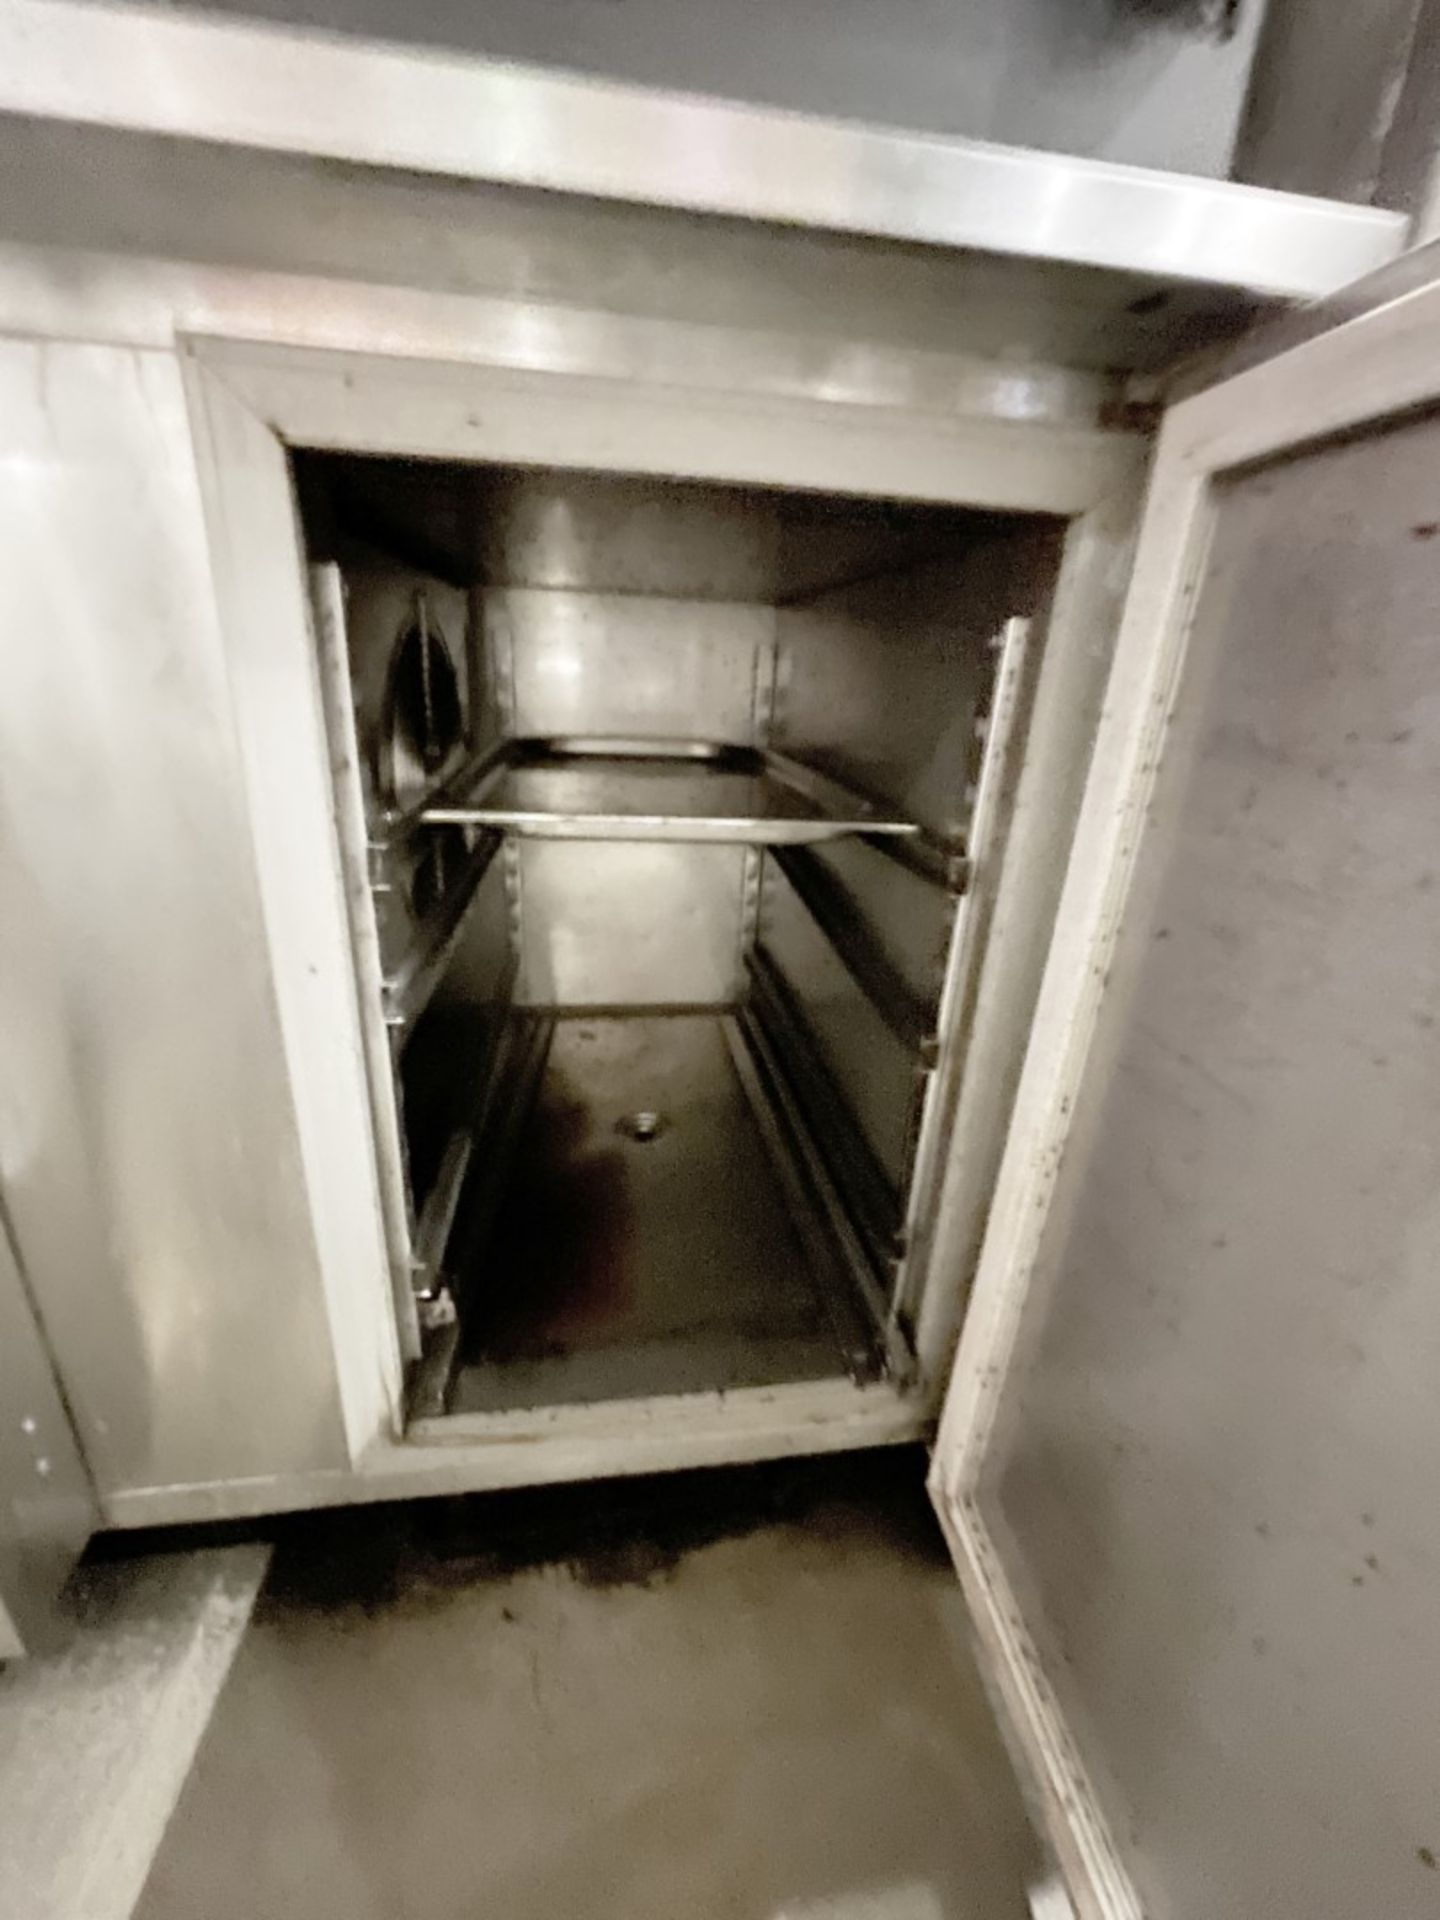 1 x Angelo Po XS51H Under Oven Blast Chiller and Freezer - 10/16KG Cycle - Stainless Steel - Image 4 of 6